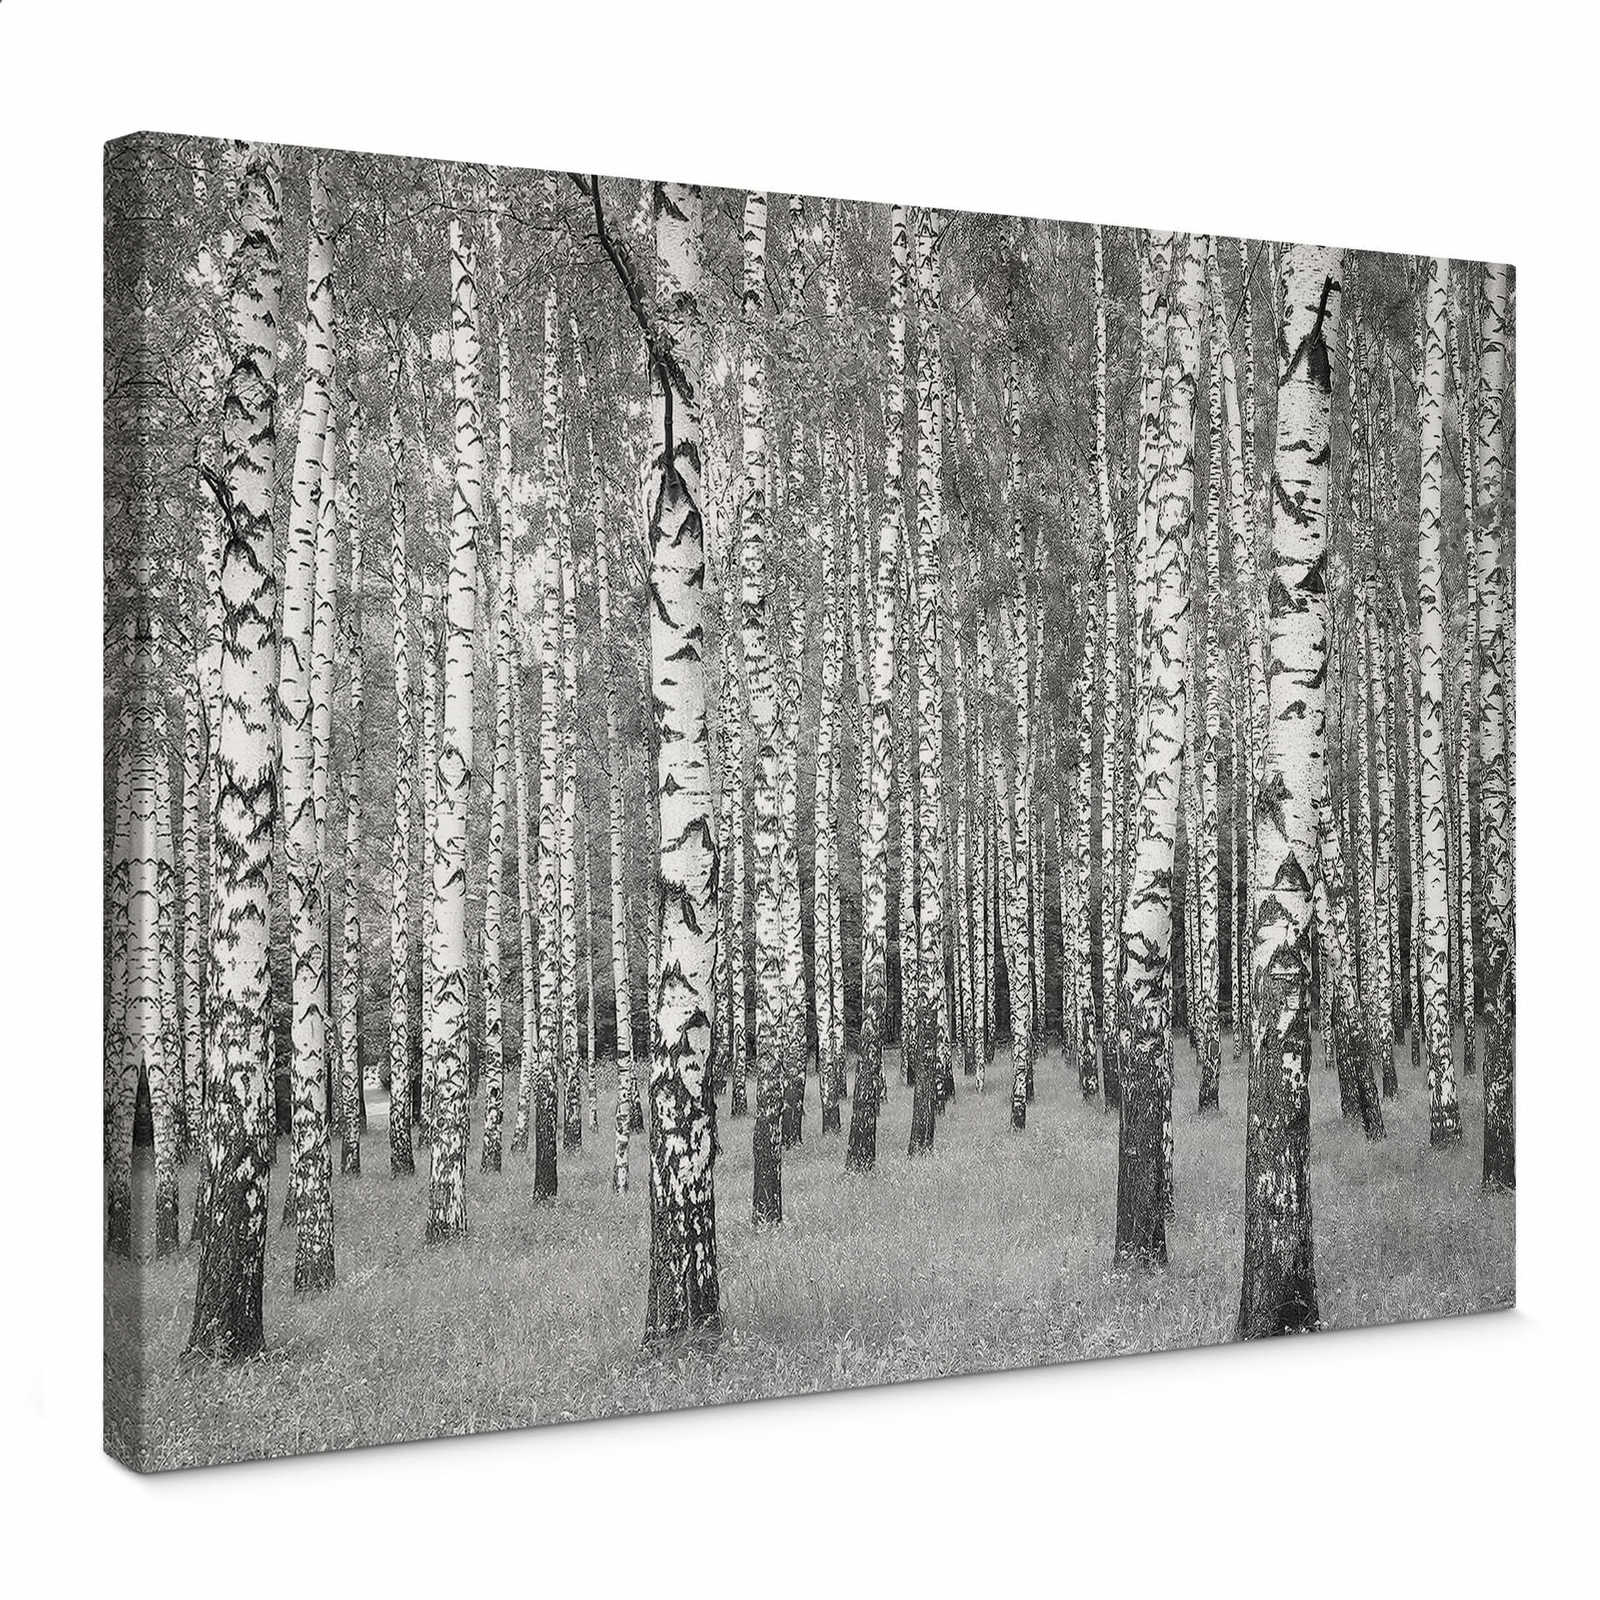         Birch forest canvas print black and white
    